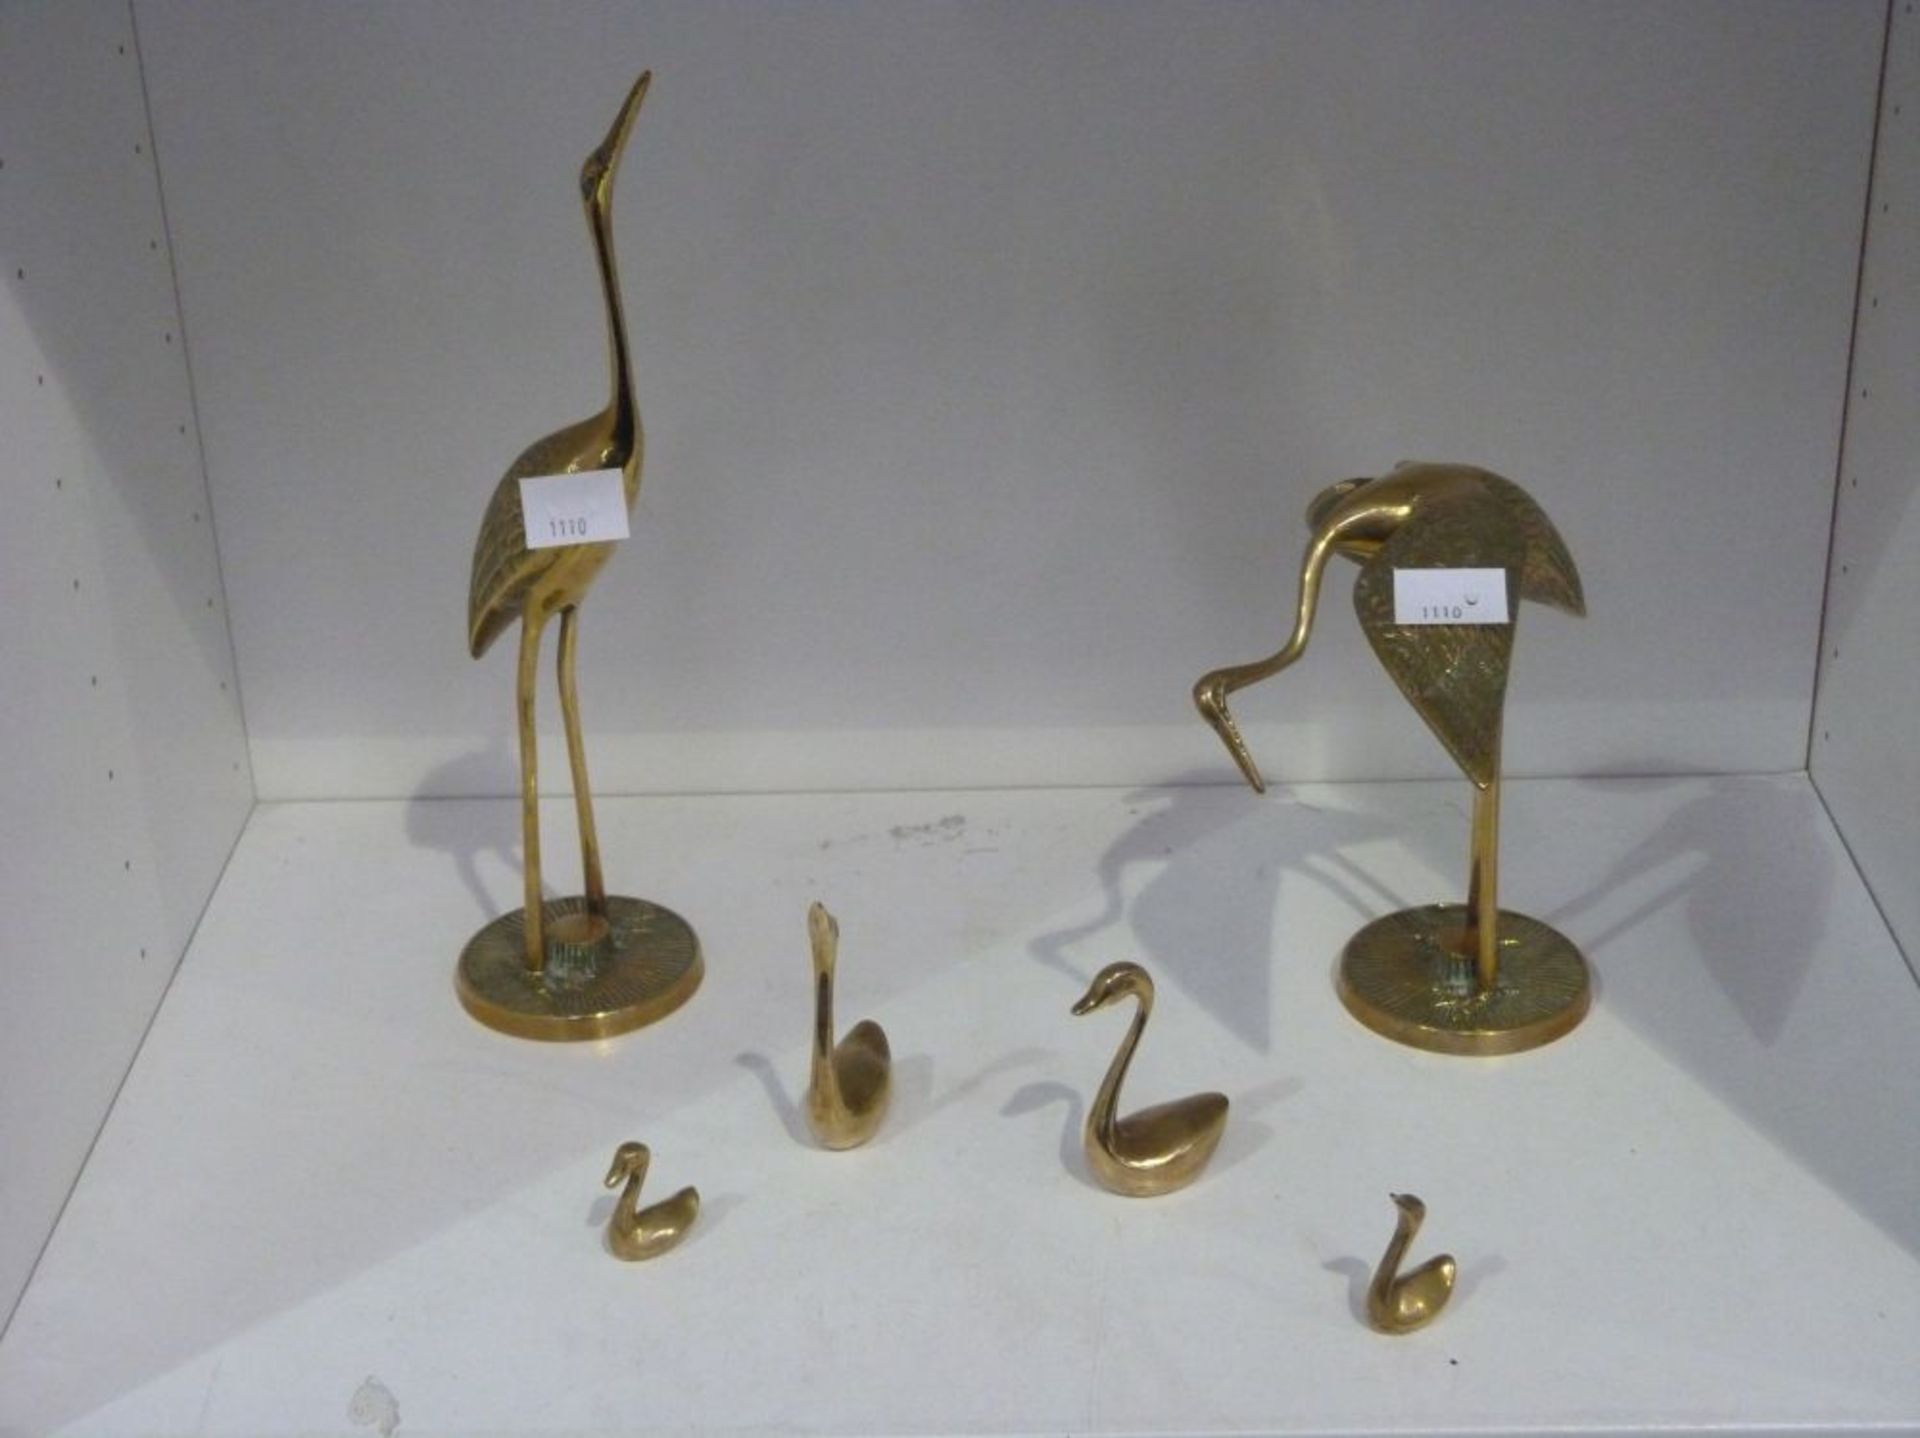 Two Solid Brass Herons, together with four Solid Brass Swans (6) (Est. £20-£30)